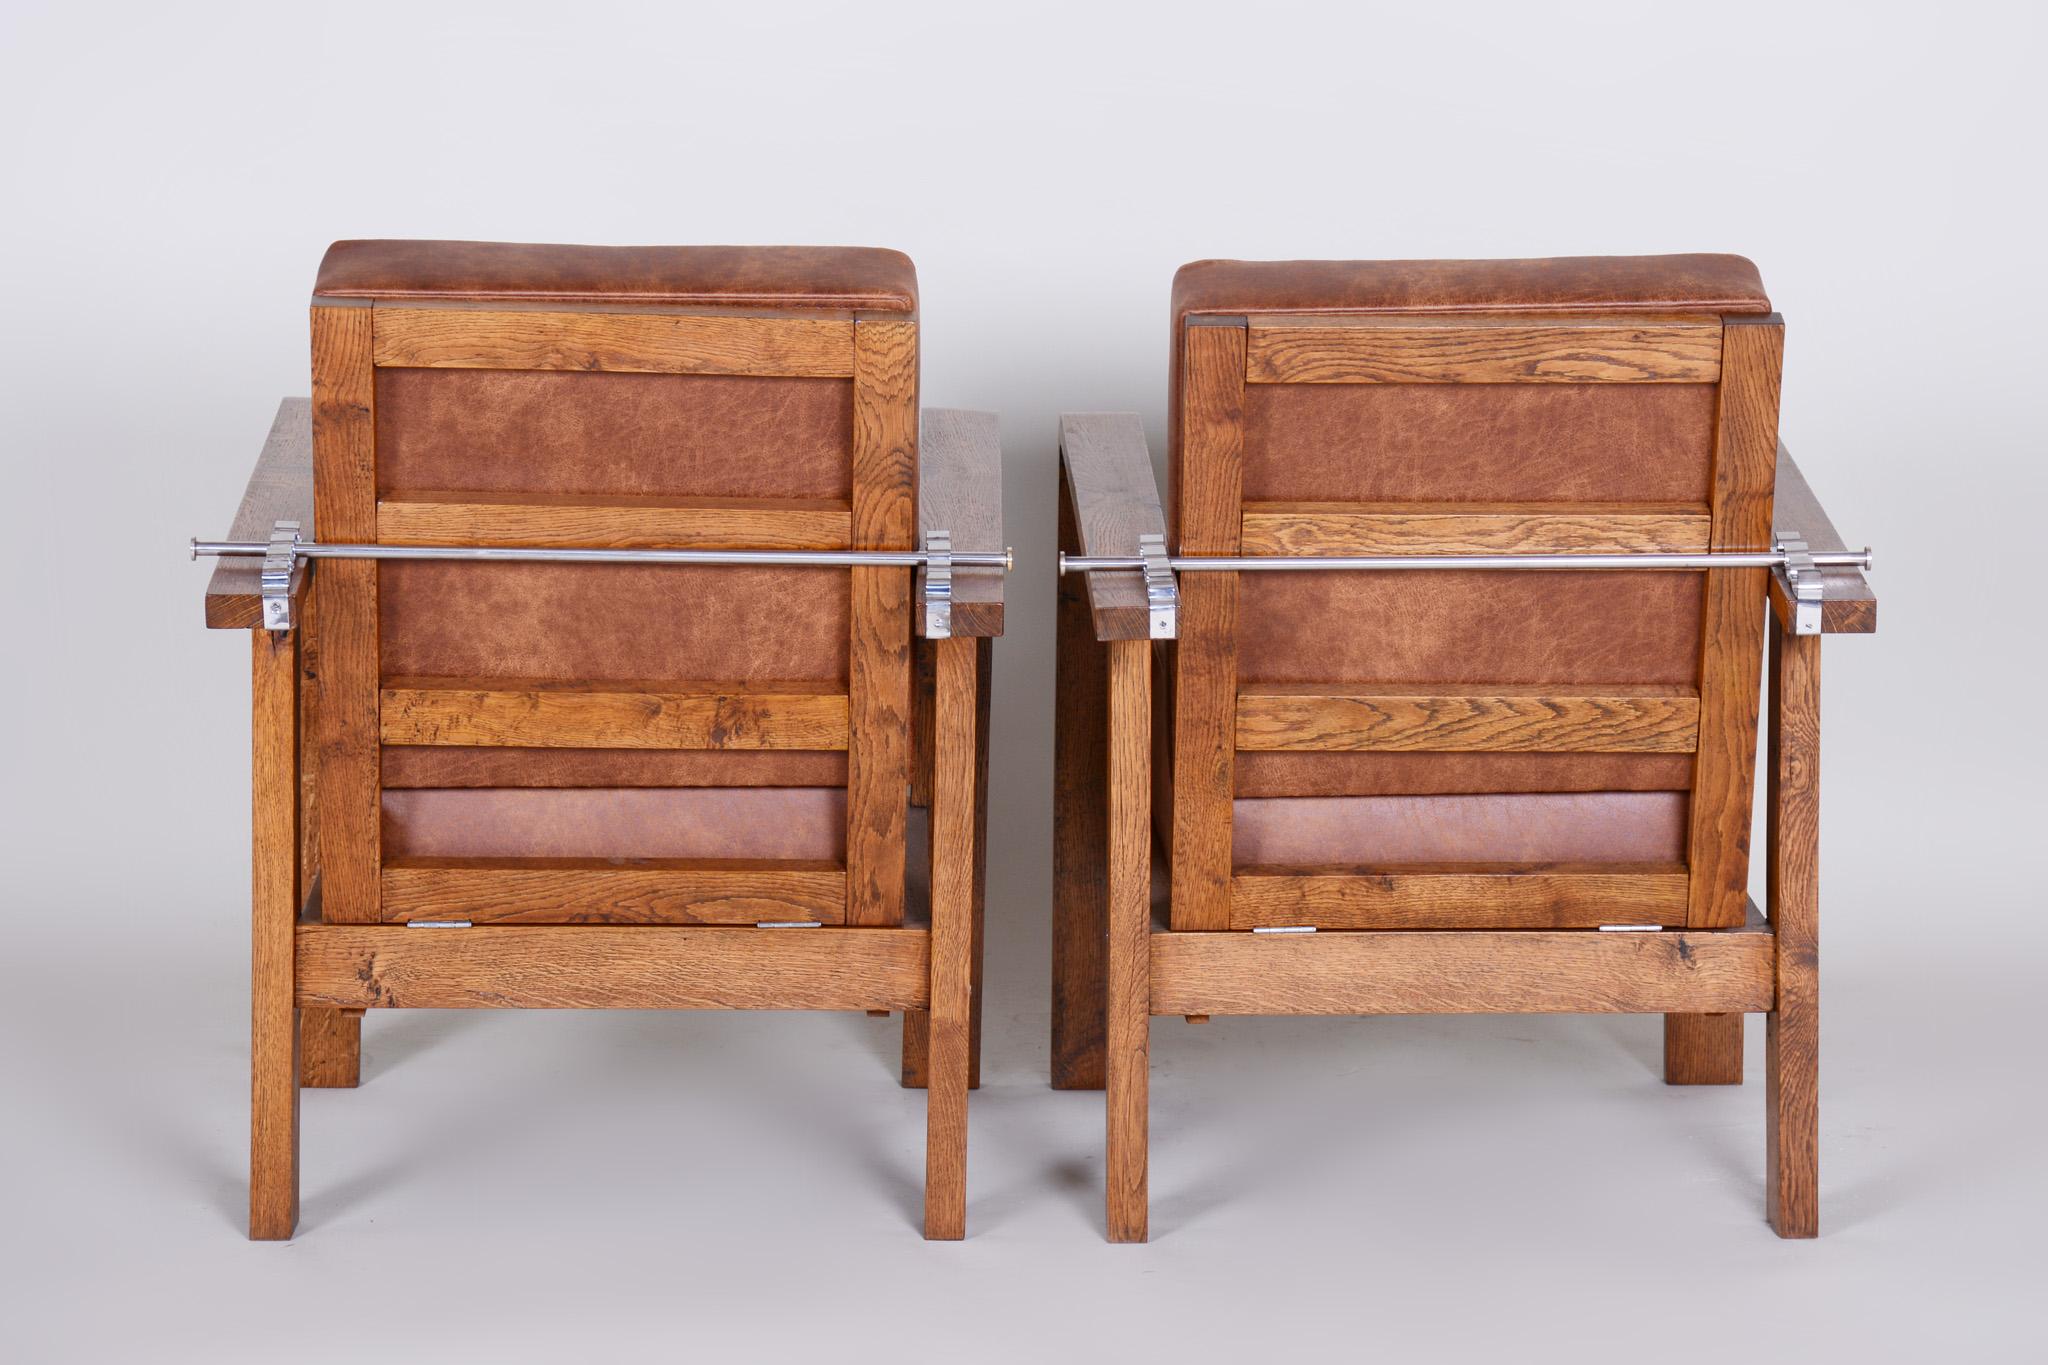 Upholstery Pair of Czech Adjustable Functionalist Leather and Oak Armchairs, 1930s For Sale